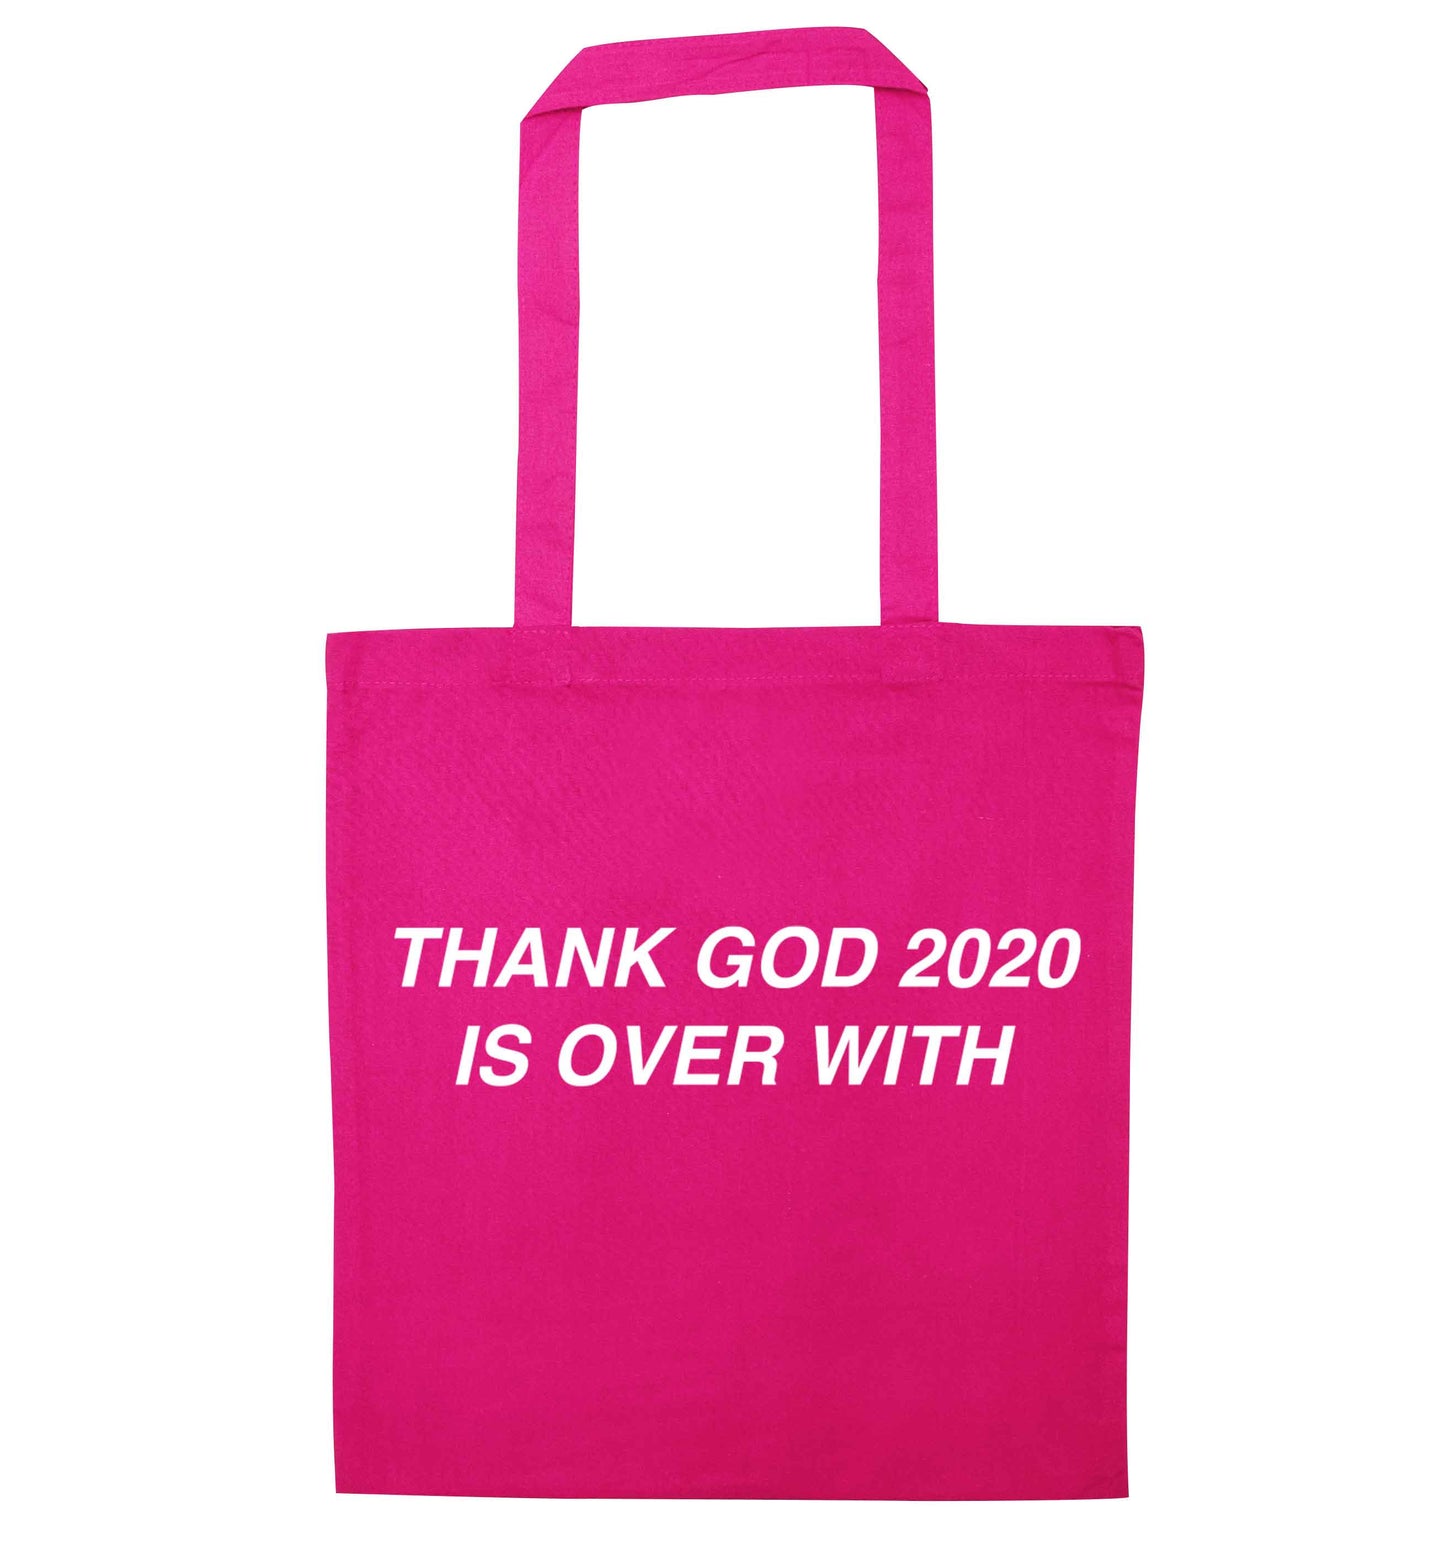 Thank god 2020 is over with pink tote bag